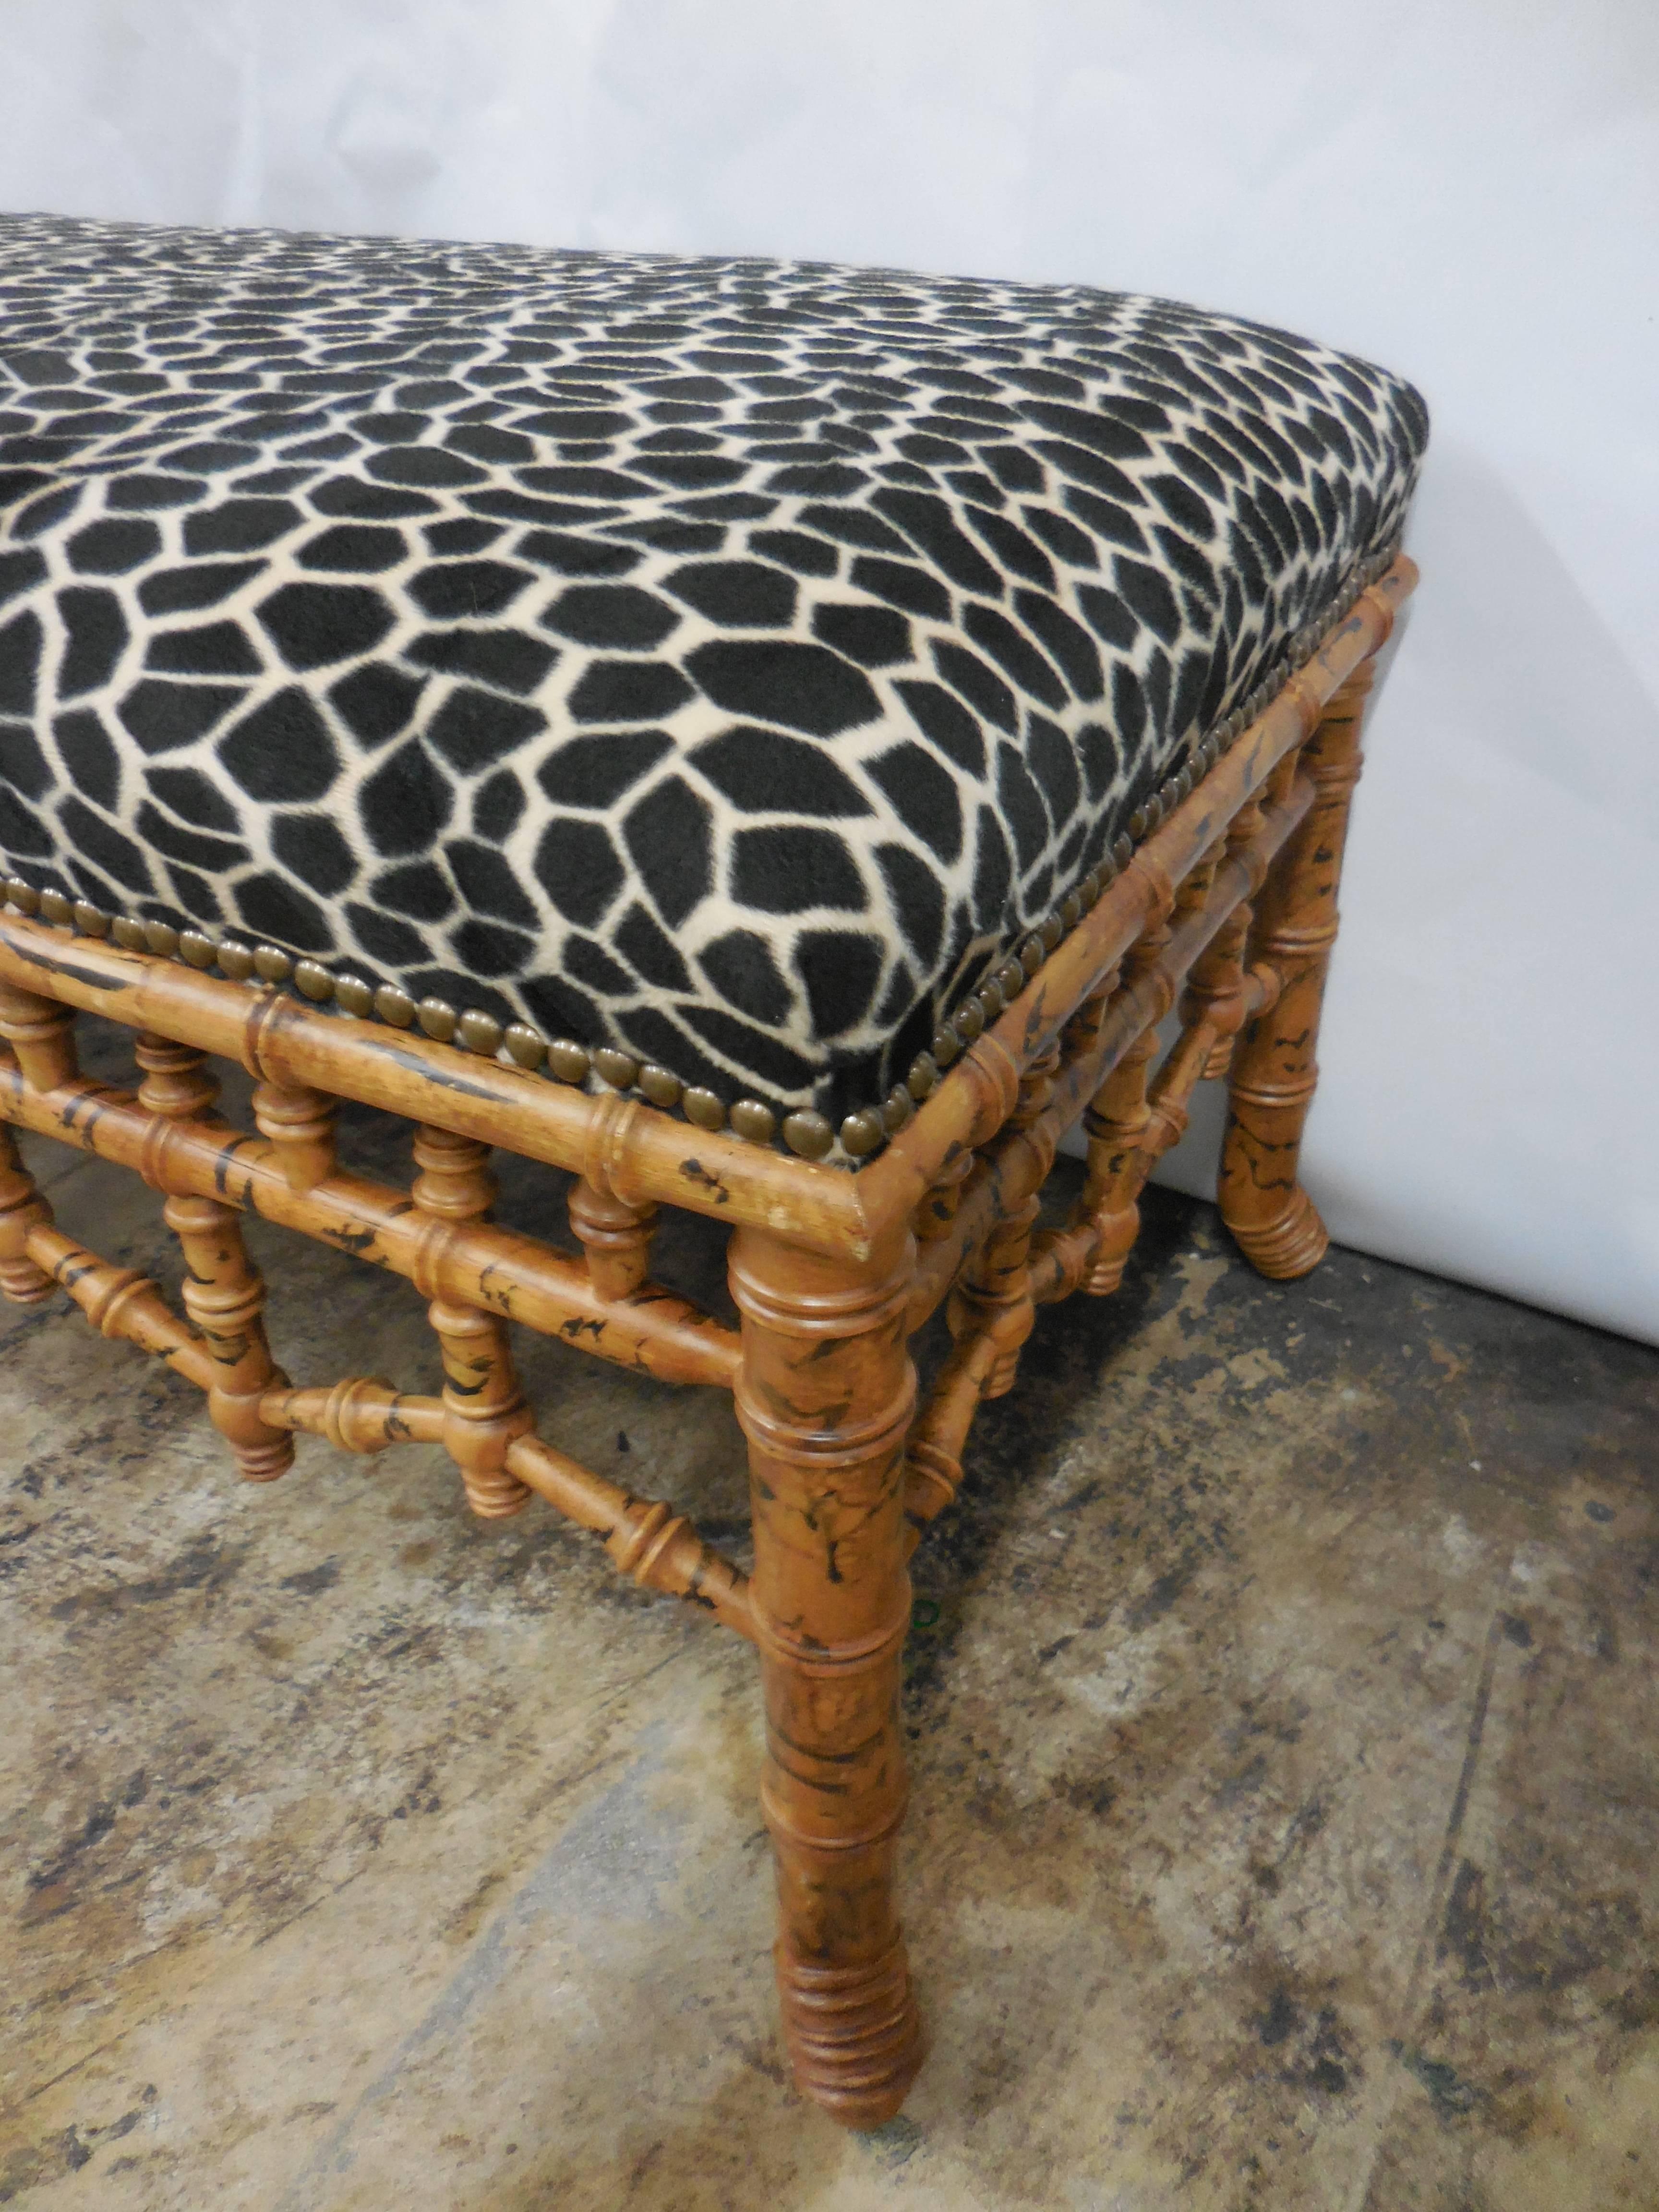 Chic Mid-Century bamboo bench with soft leopard fabric and nailhead trim.